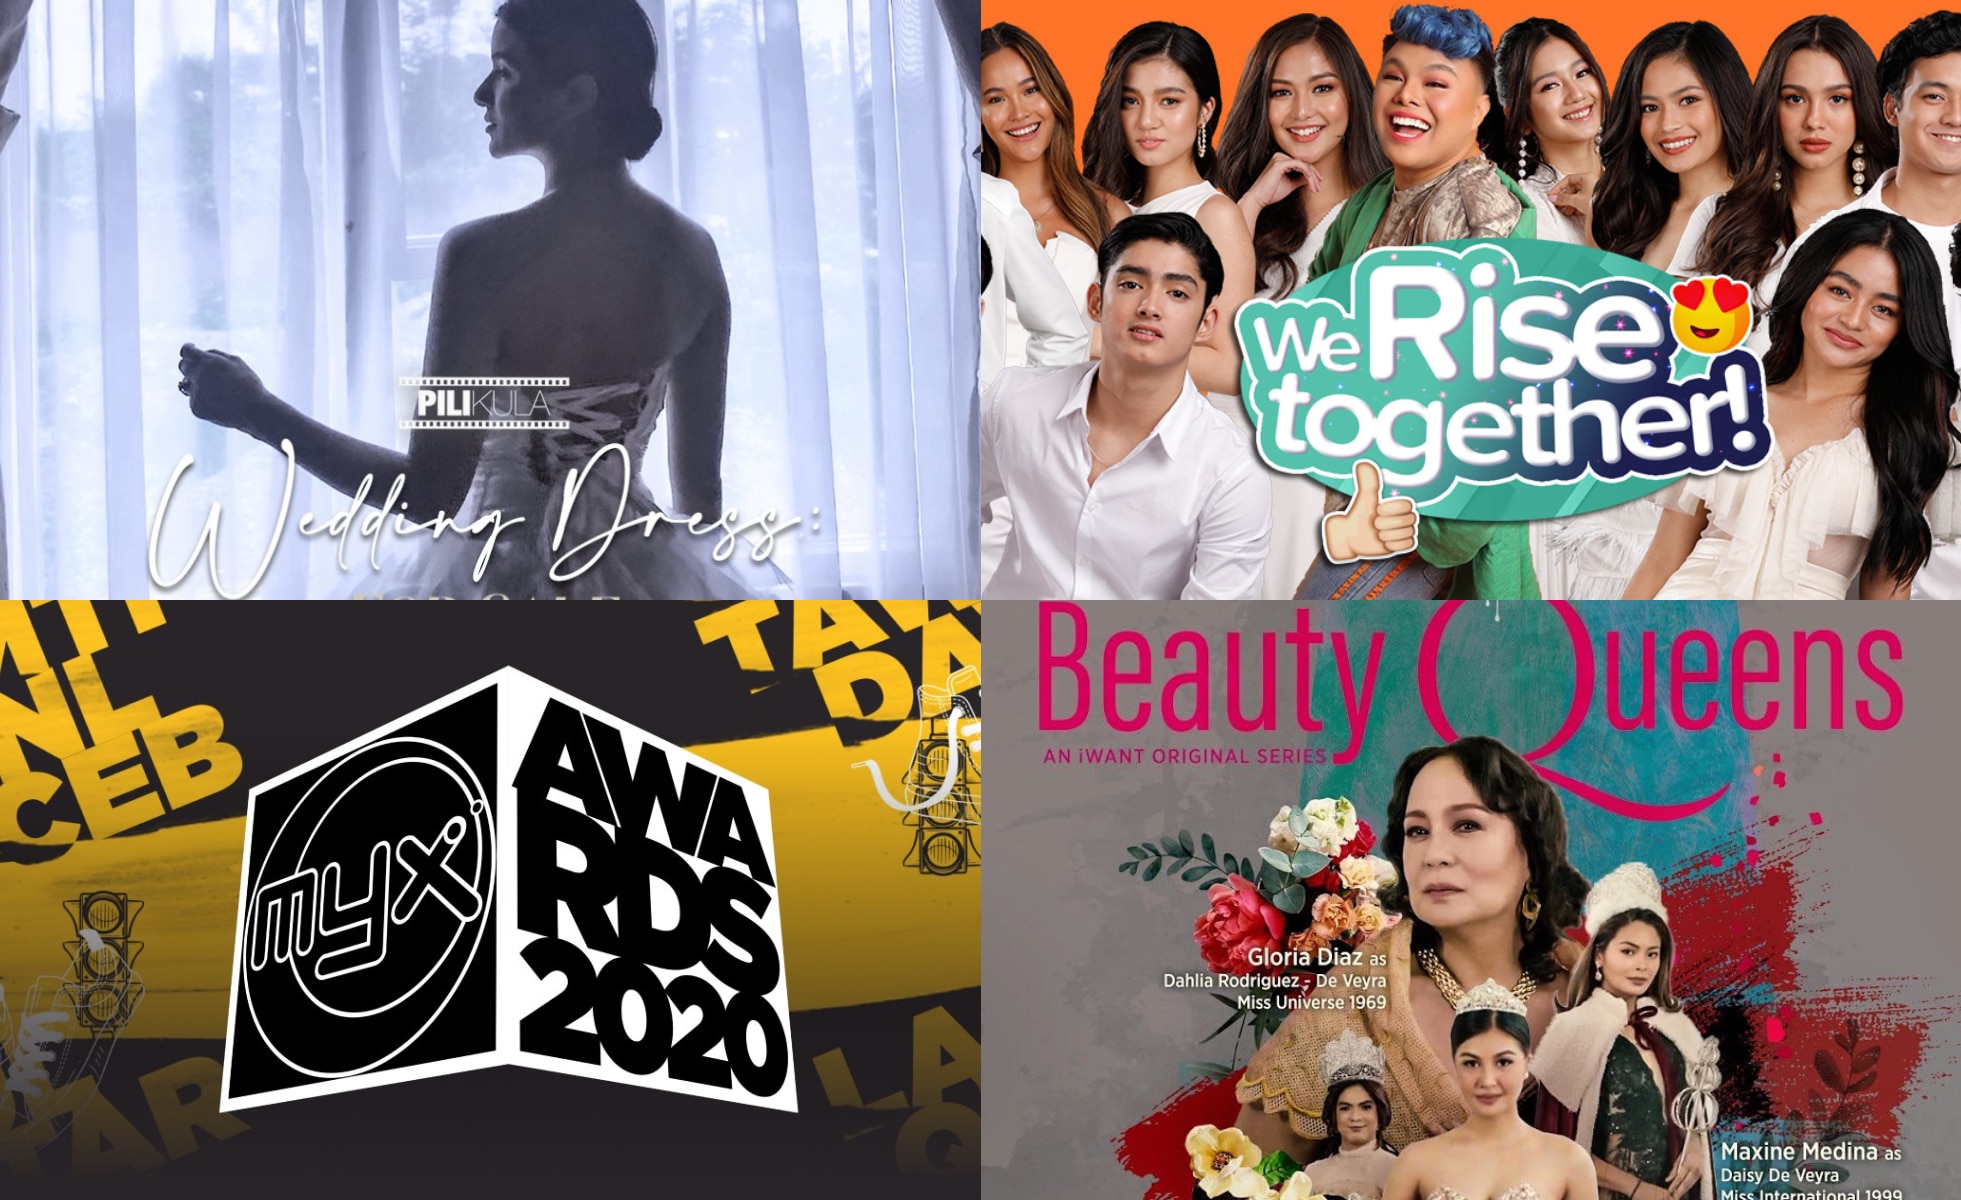 Get through your troubles with you favorite Kapamilya stars in ABS-CBN’s digital shows this July